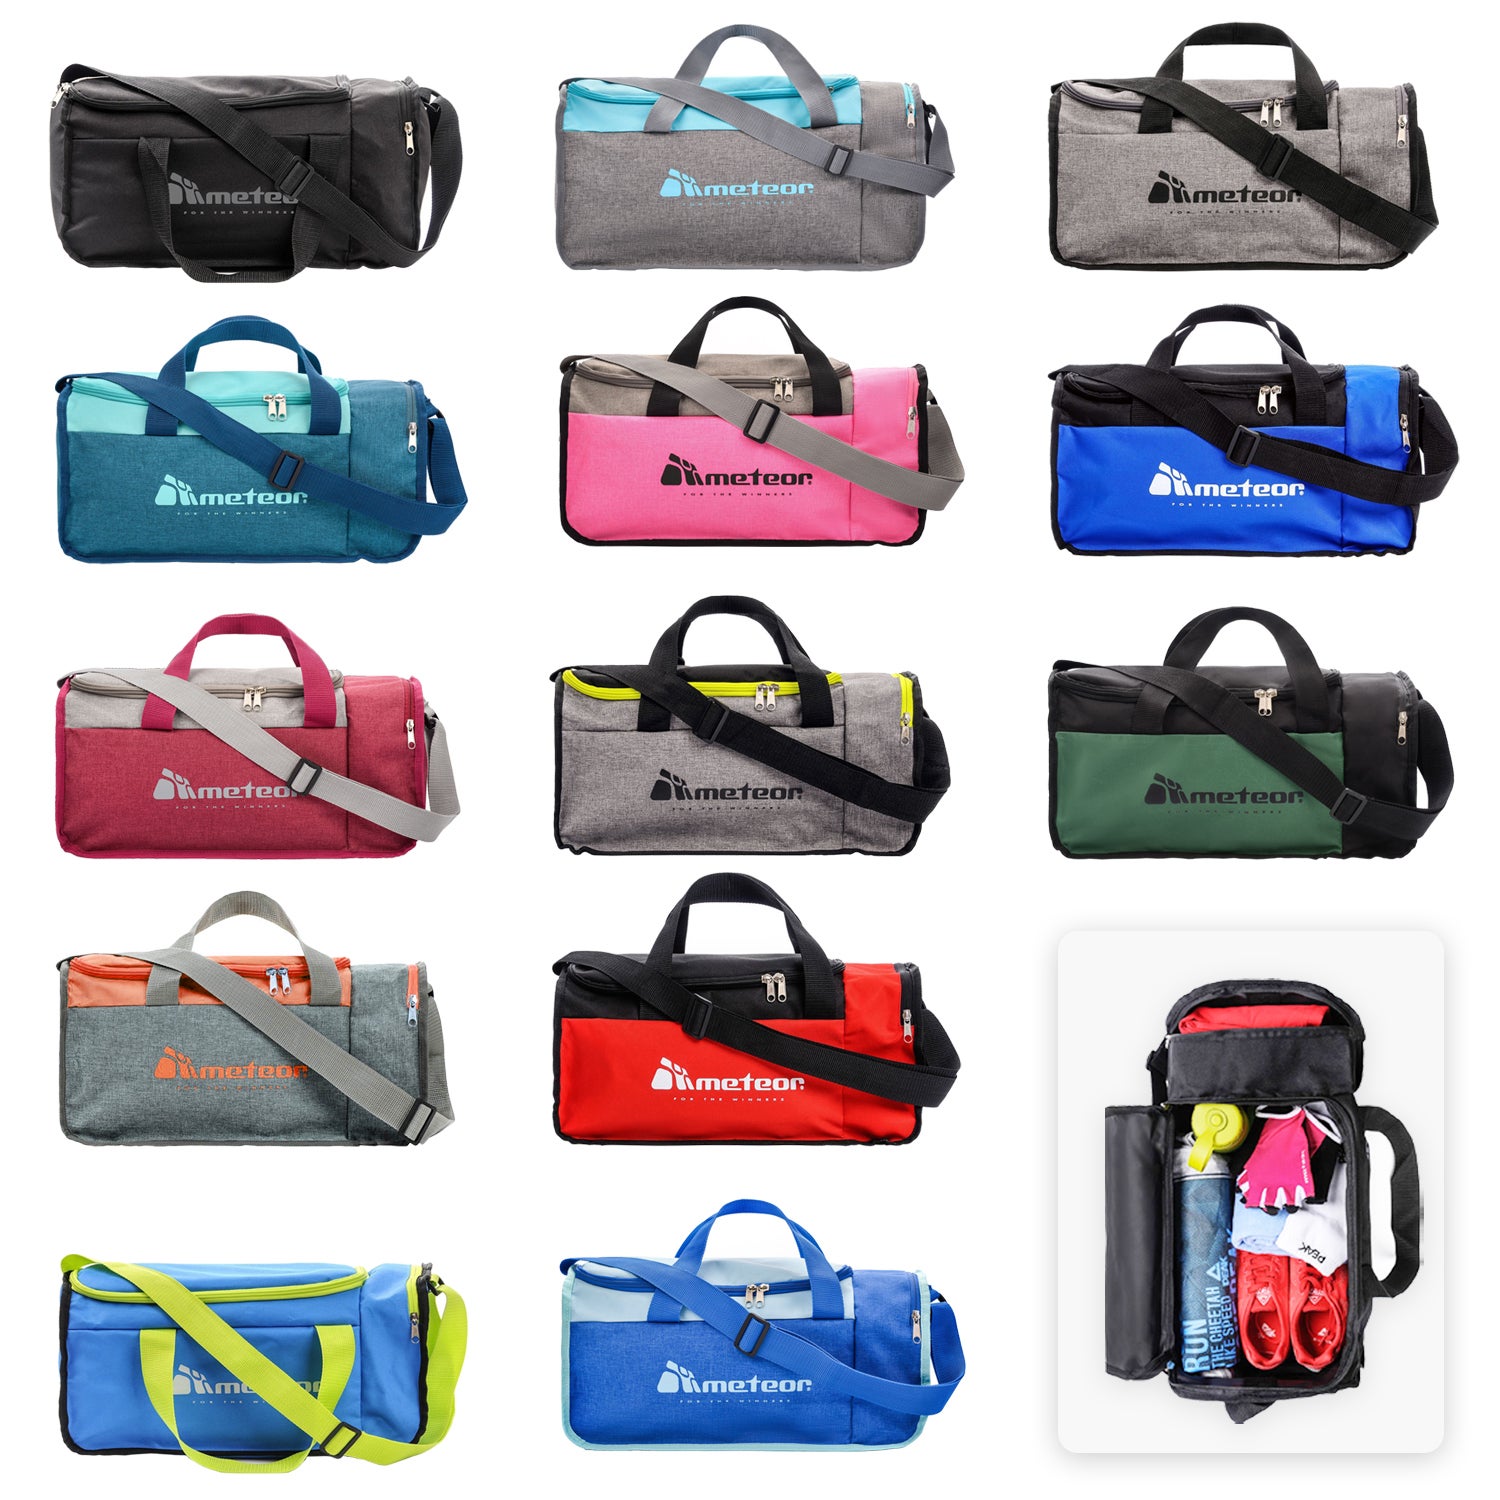 METEOR Large Sports Duffle Bag with Shoe Compartment - Gym Bag,Sport Bag,Travel Bag,Travel Duffle